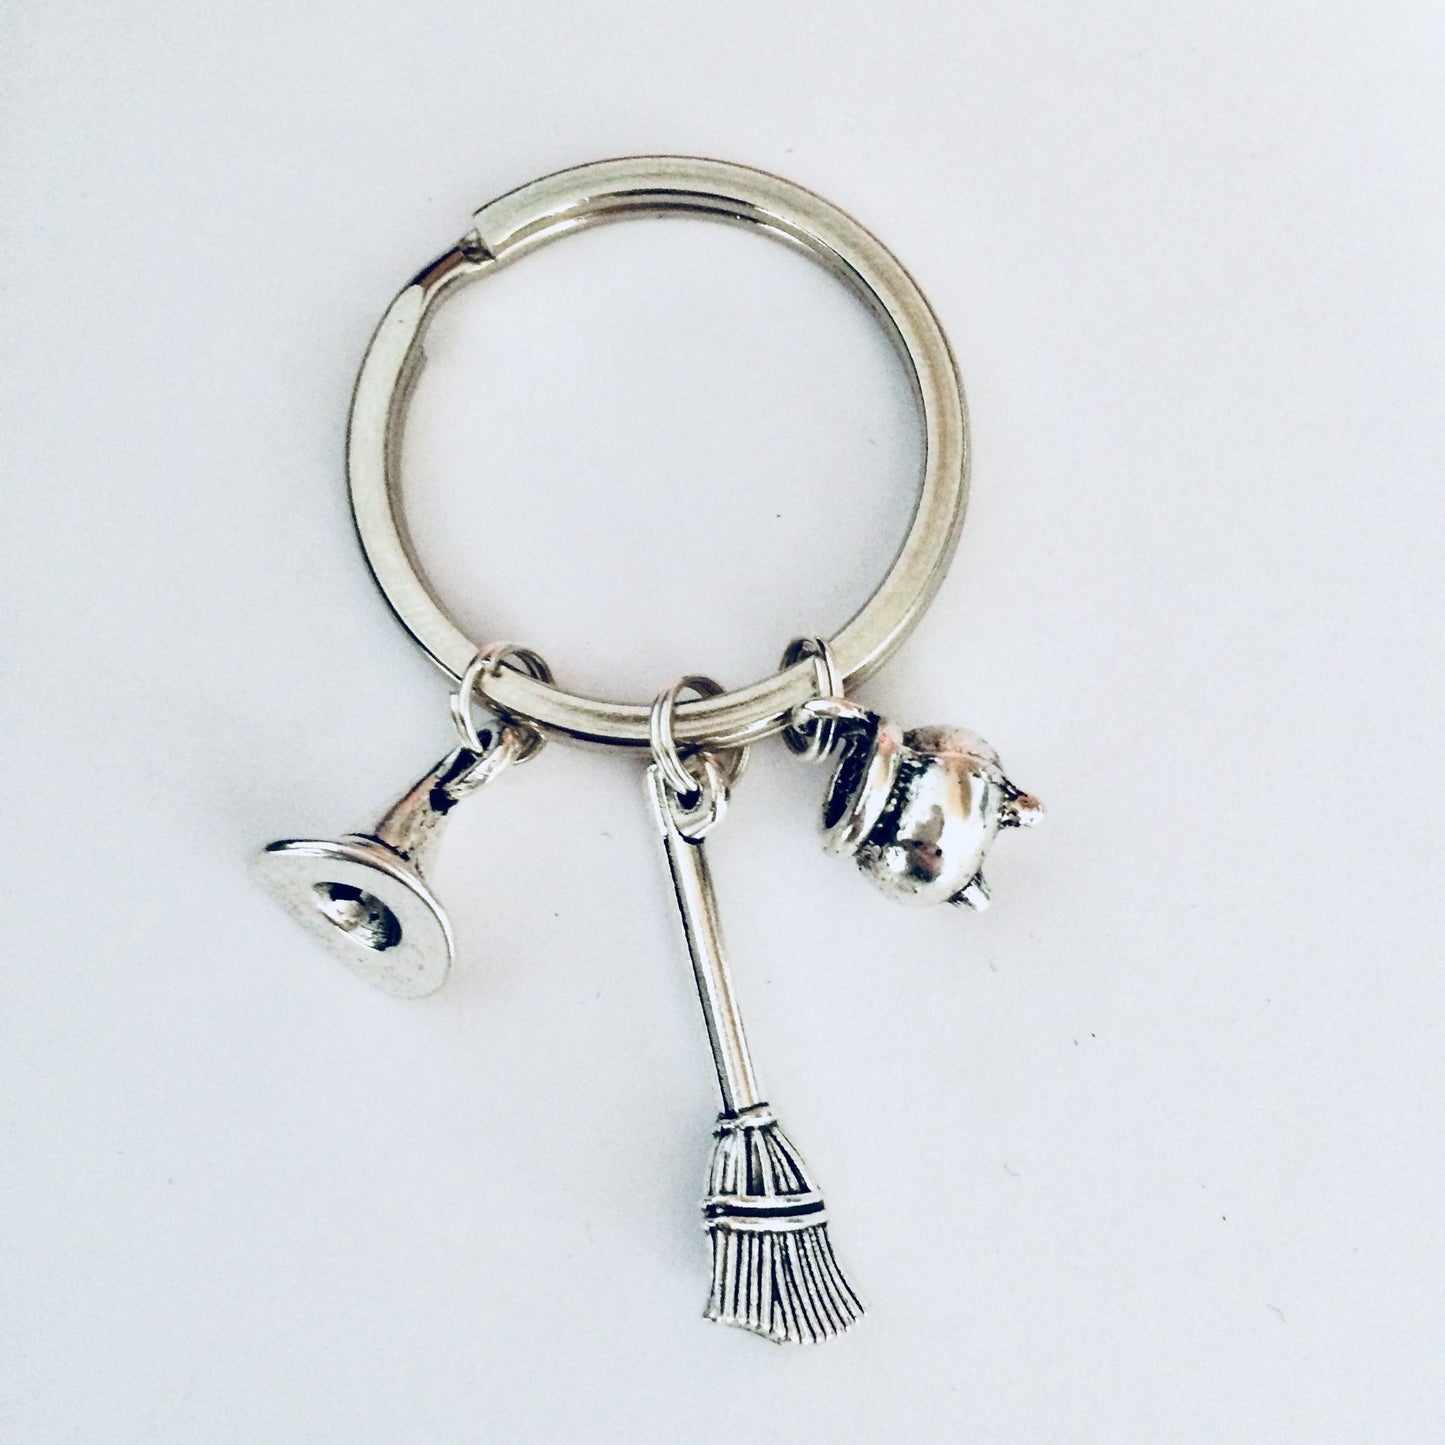 Witch Related Gift, Cauldron Keychain, Broomstick Keychain, Witches Hat Keychain, Witchy Keyring, Witchcraft Gifts, Halloween Keychain.